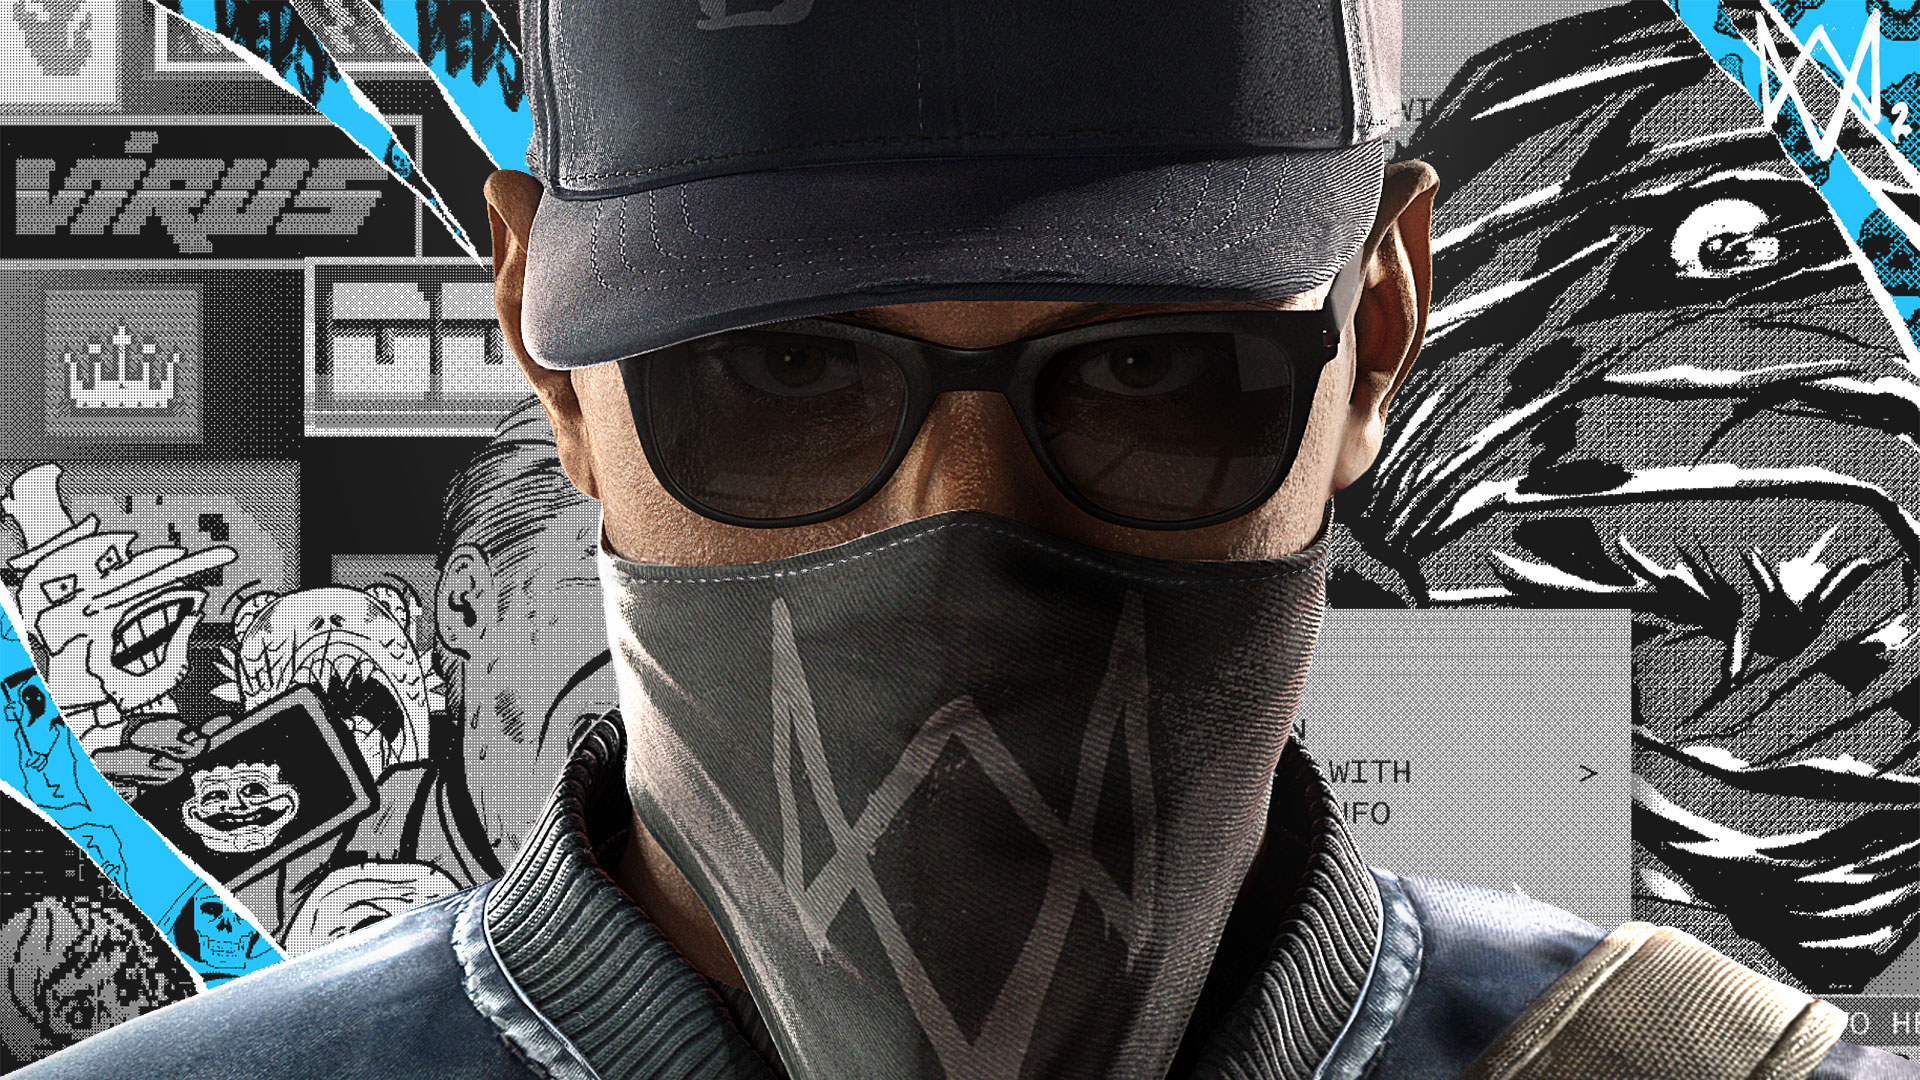 Video Game Watch Dogs 2 HD Wallpaper | Background Image